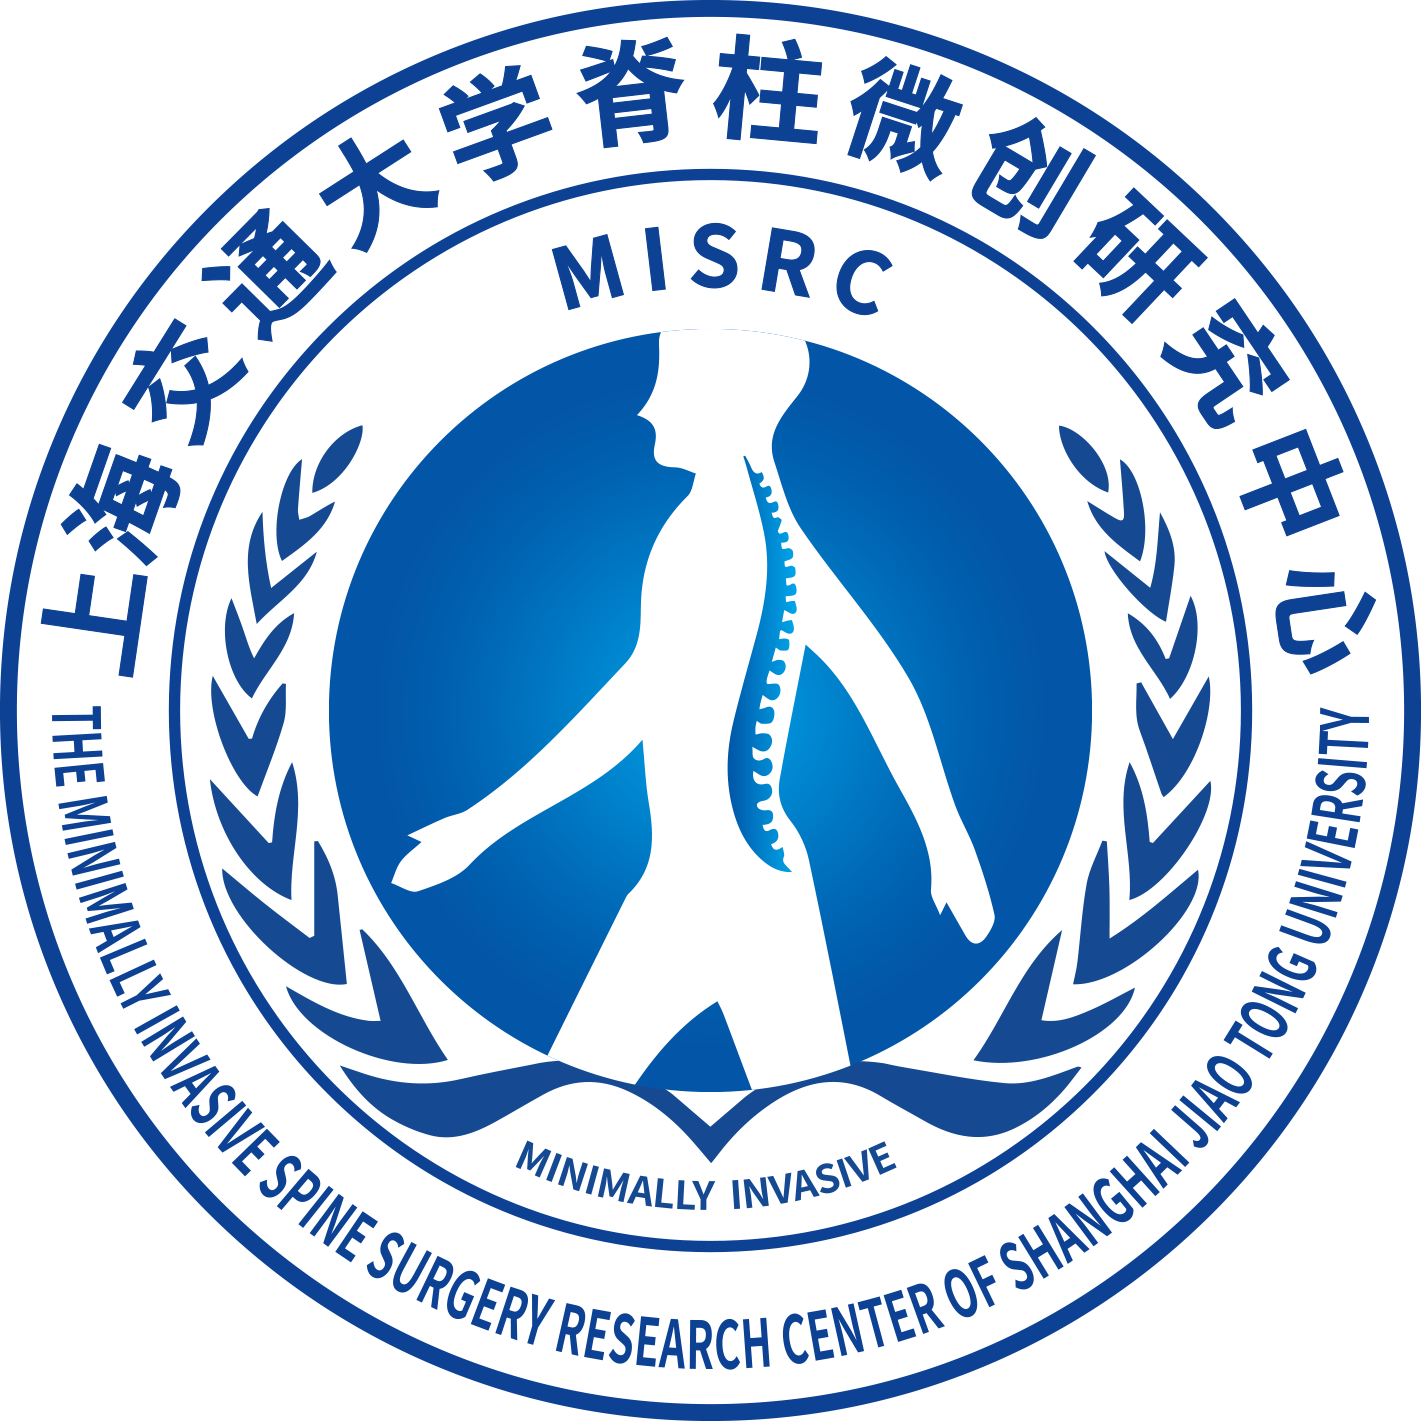 The Minimally Invasive Spine Surgery Research Center Of Shanghai Jiaotong University